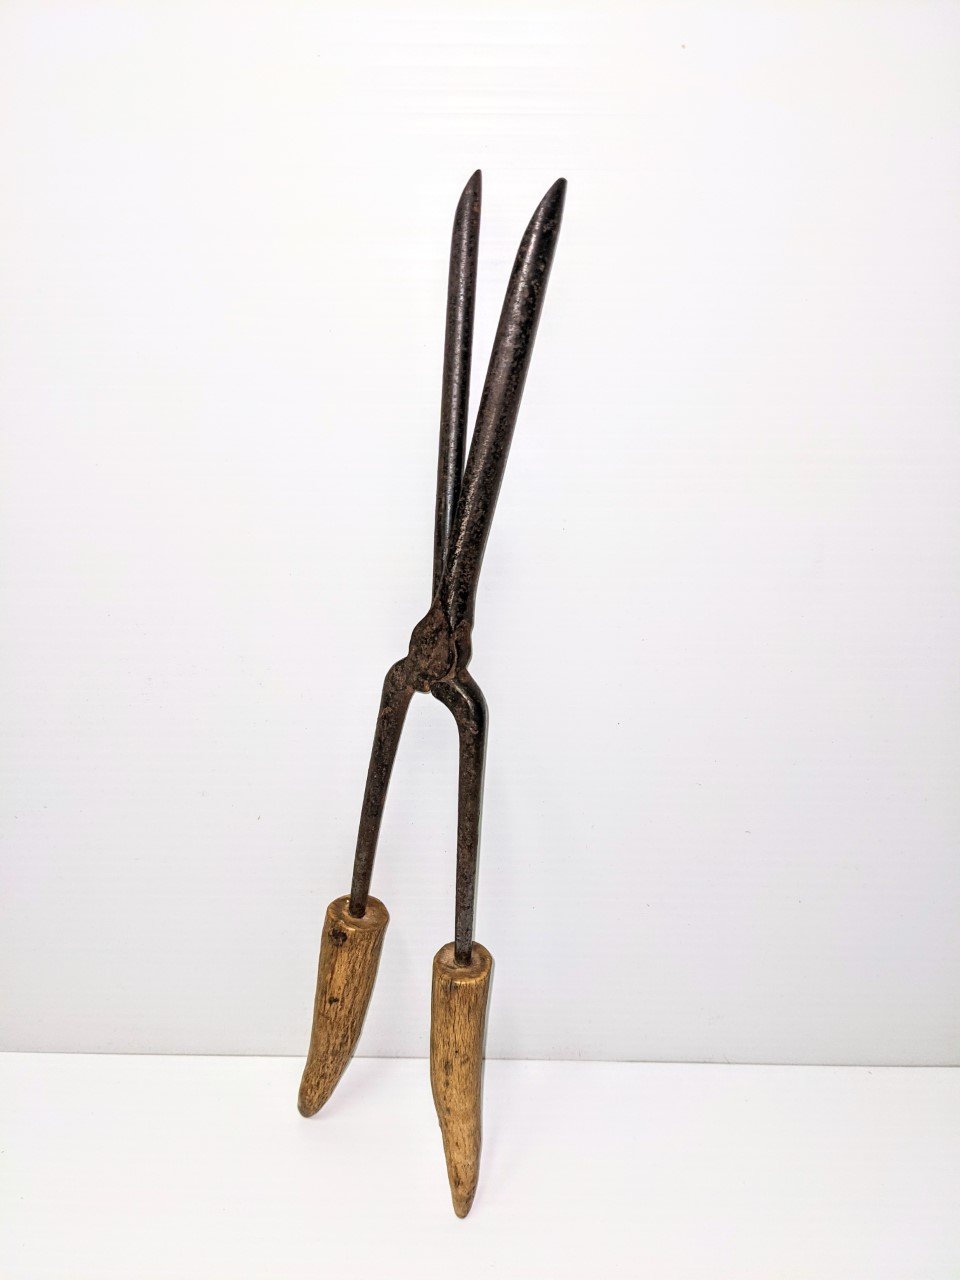 This unique looking object is a Curling Iron. It has a very small barrel for making tight curls and the handles are made from tips of antler. To heat the curling iron, one would place it near the fire or on a cook stove to heat the metal barrel up before rolling it in the hair. This curler was found in one of the trunks that was inside the "Clarke house" when the structure was purchased from Vera and Currie Ward!

01/03/2021
994.3.14 / Ward, Currie and Vera